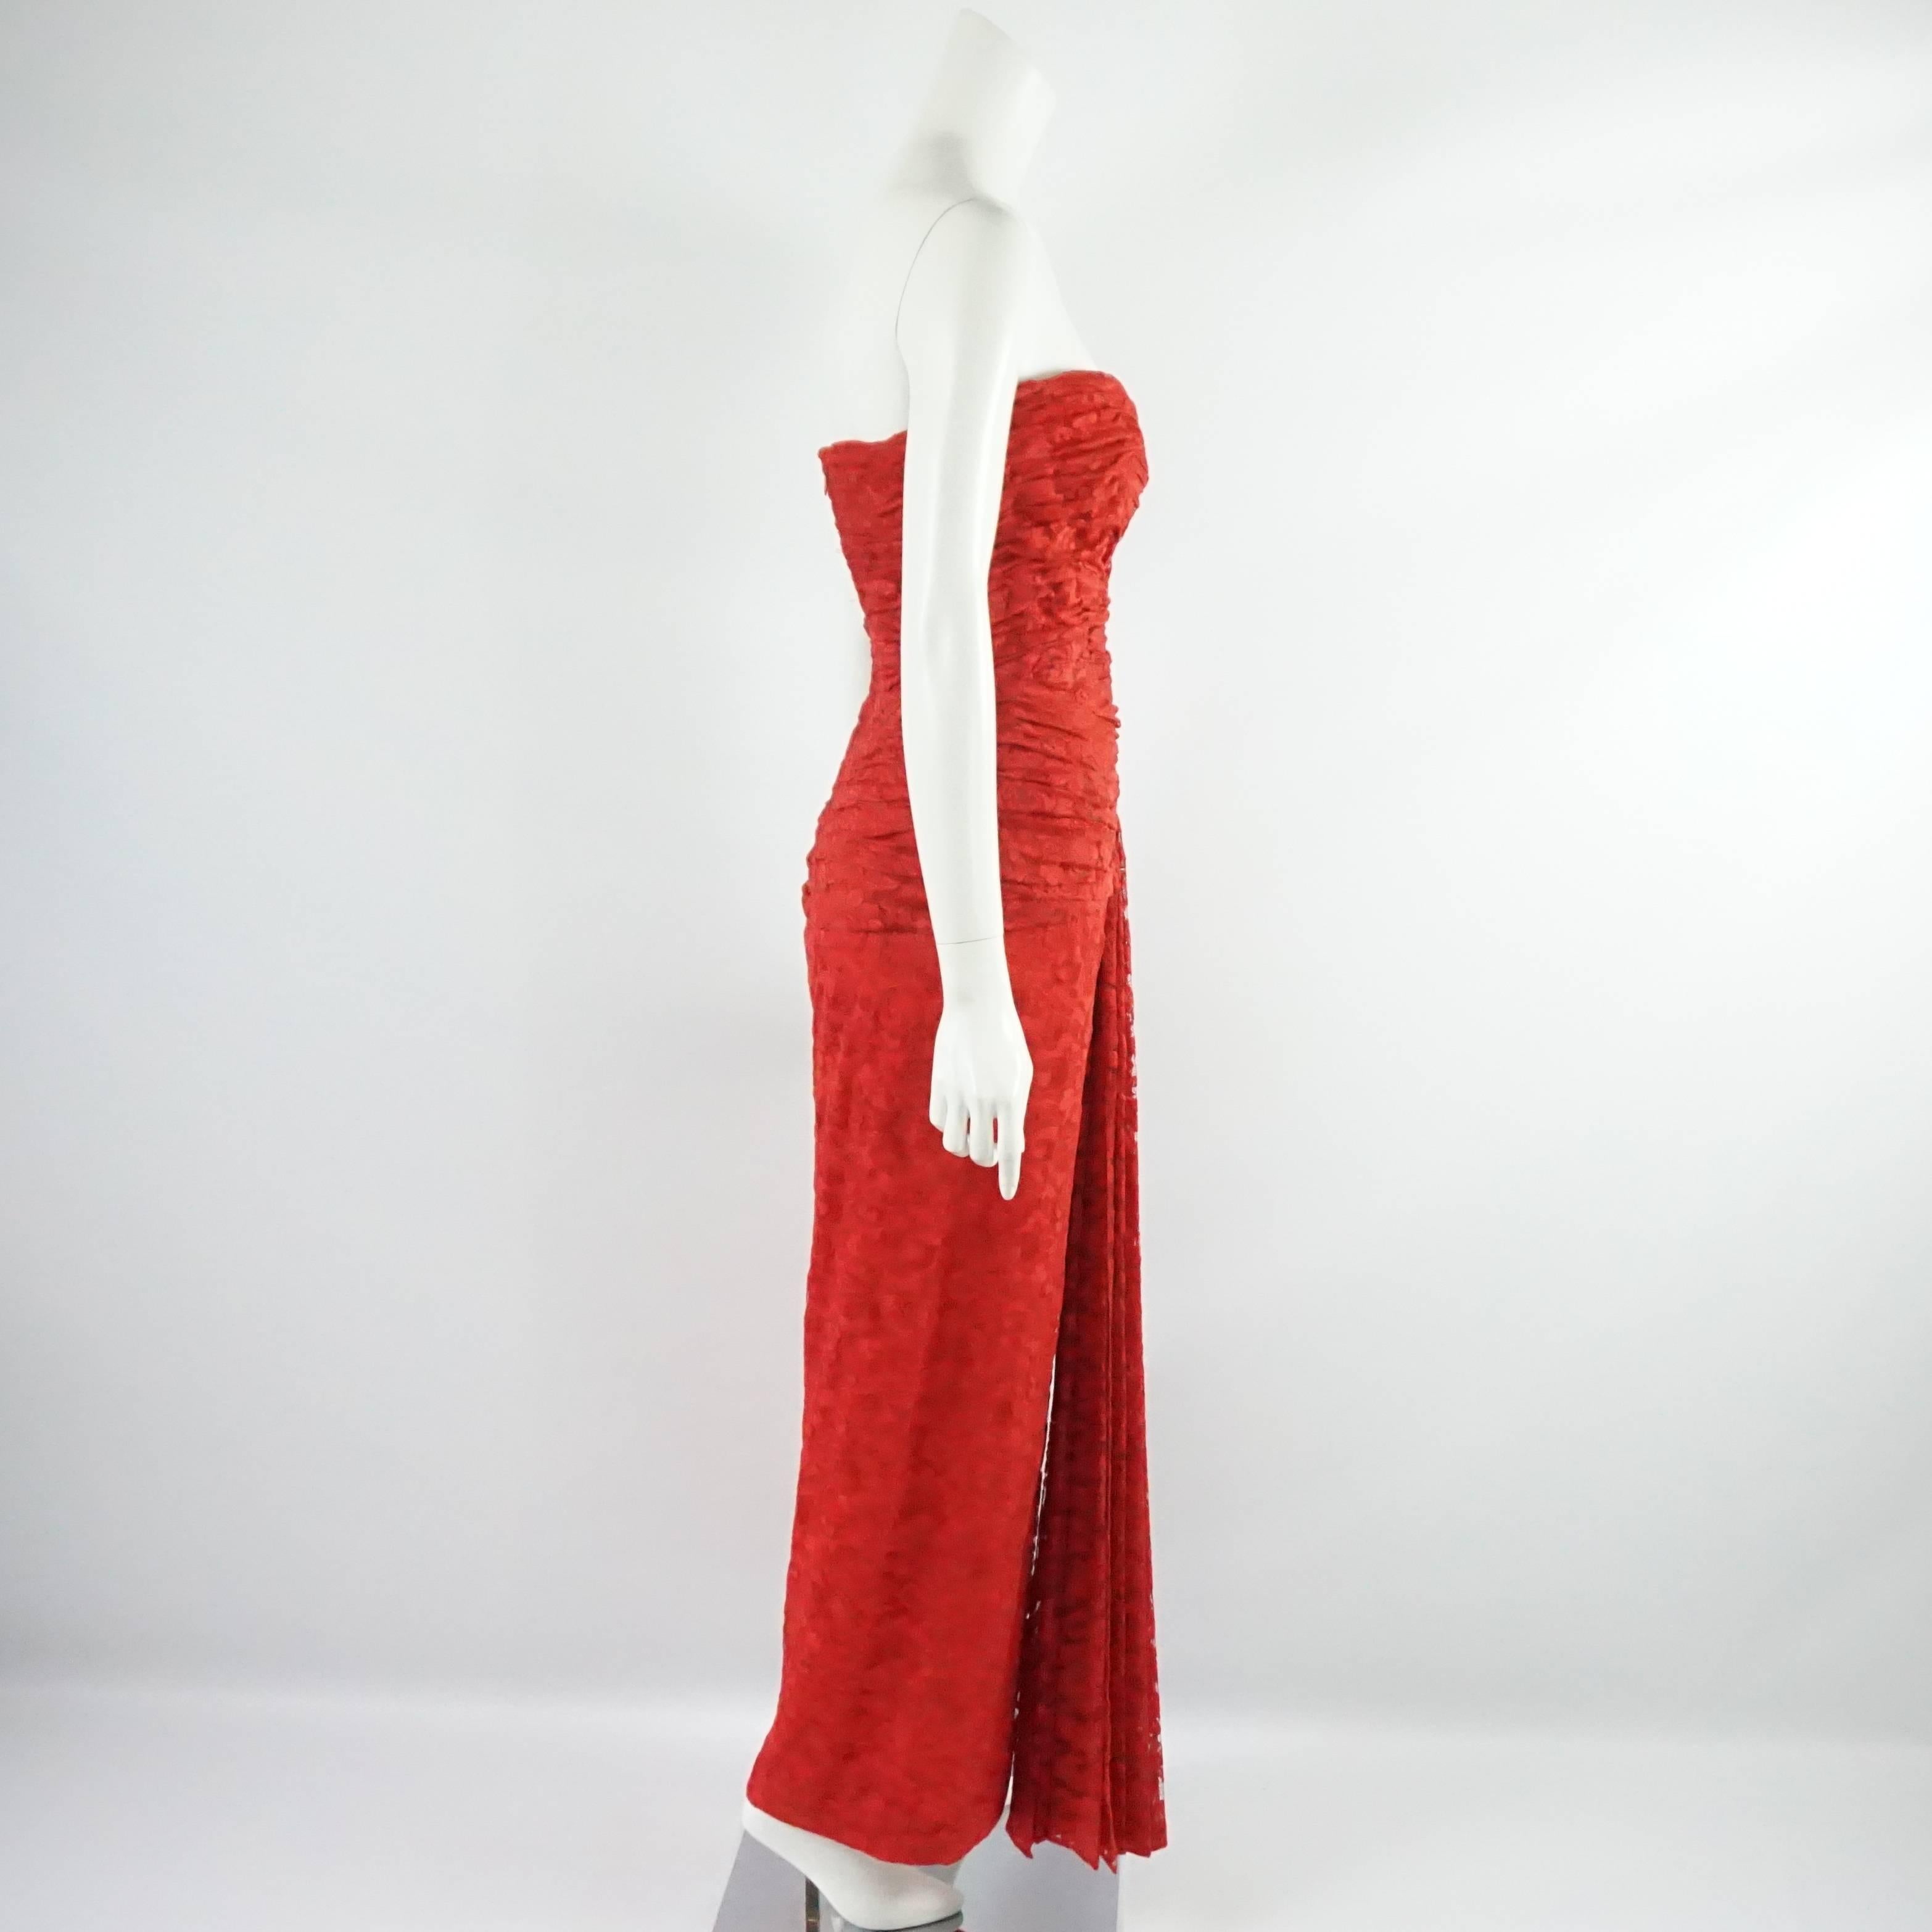 This Mark Zunino gown is made of red lace. It is strapless and has a sweetheart neckline. This gown is in excellent condition.

Measurements
Bust: about 32"
Waist: 28"
Hips: 32.5"
Length: 49"